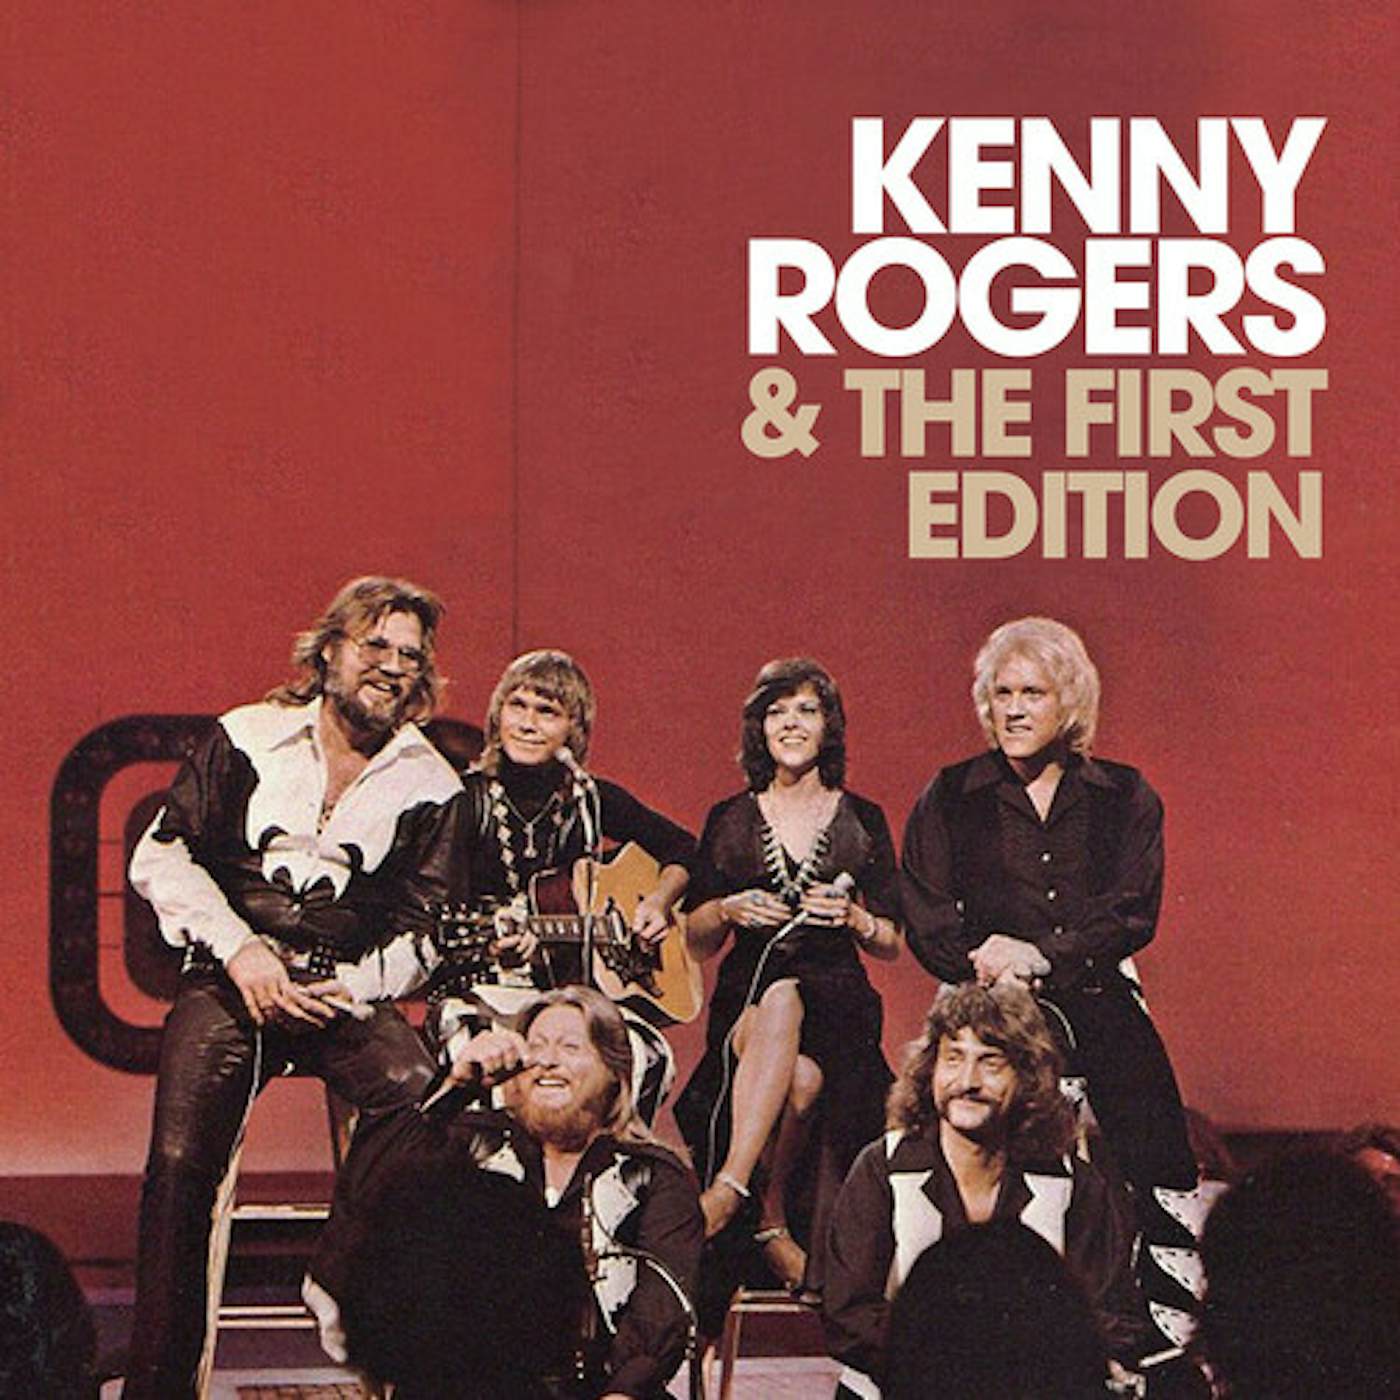 KENNY ROGERS & THE FIRST EDITION CD